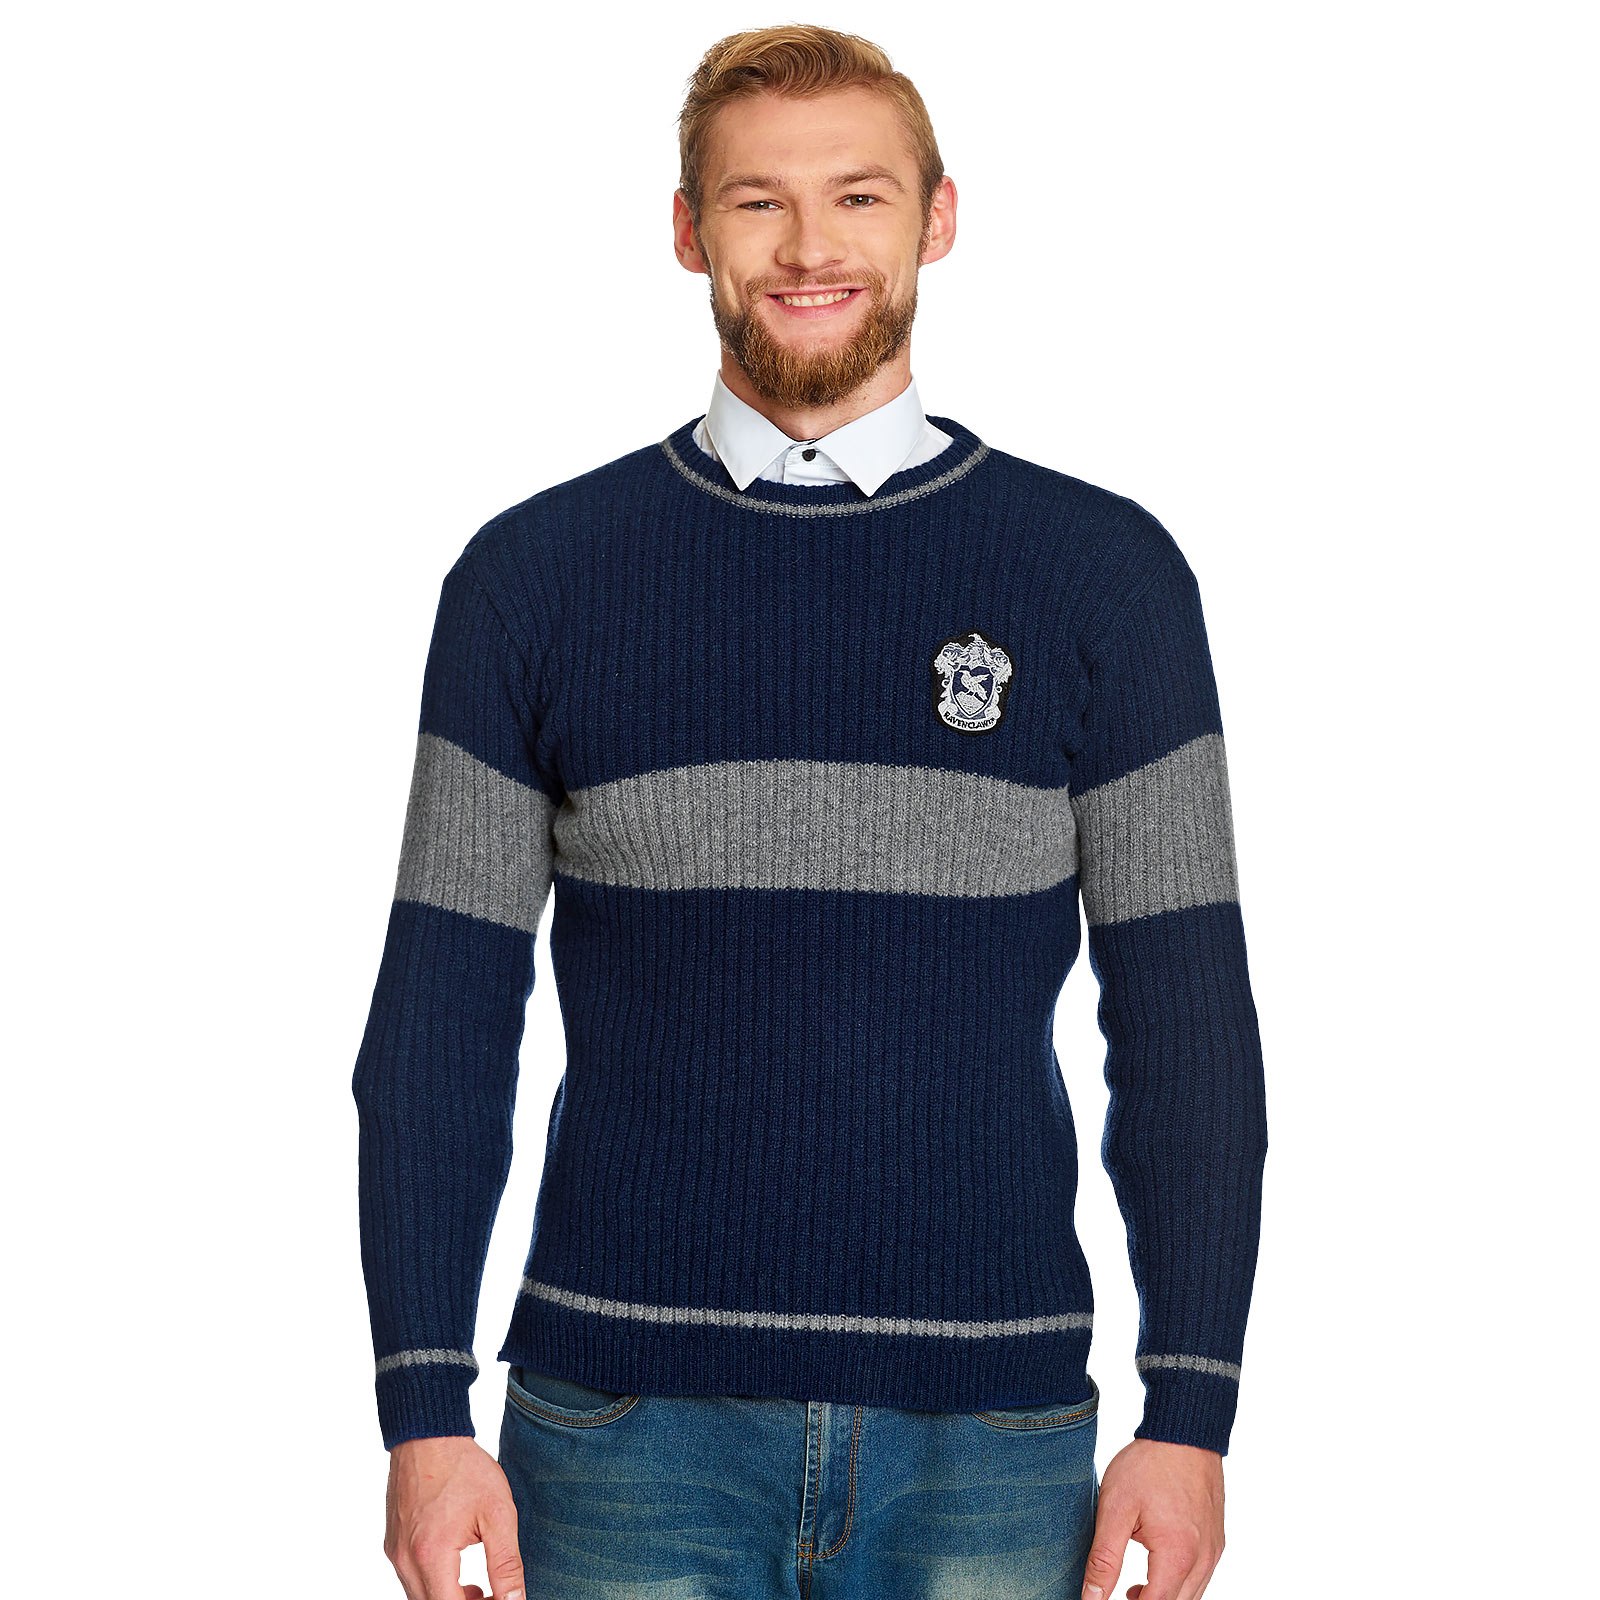 Harry Potter - Quidditch Sweater Ravenclaw